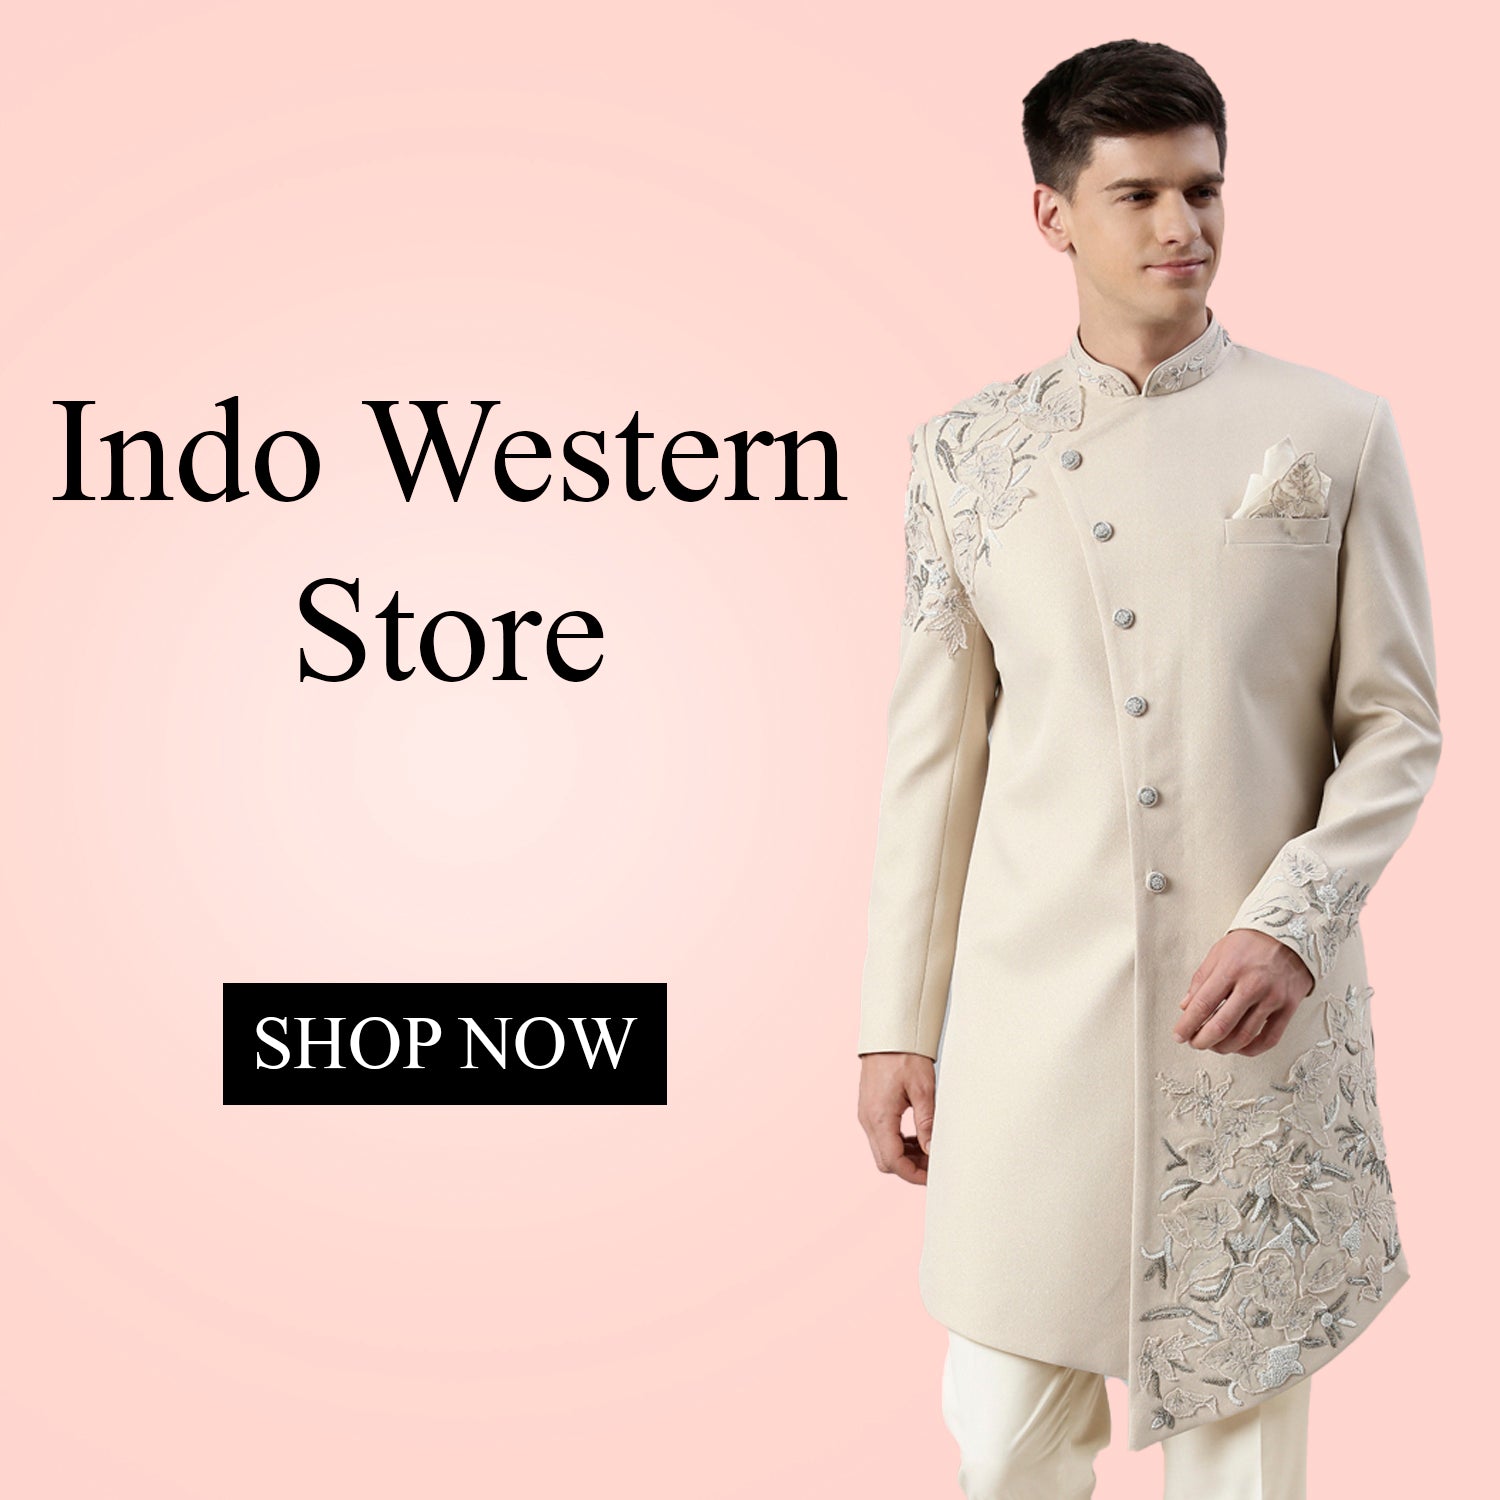 Ethnic Wear Indowestern In Wine Color | Indo western dress for men, How to  wear, Indo western dress